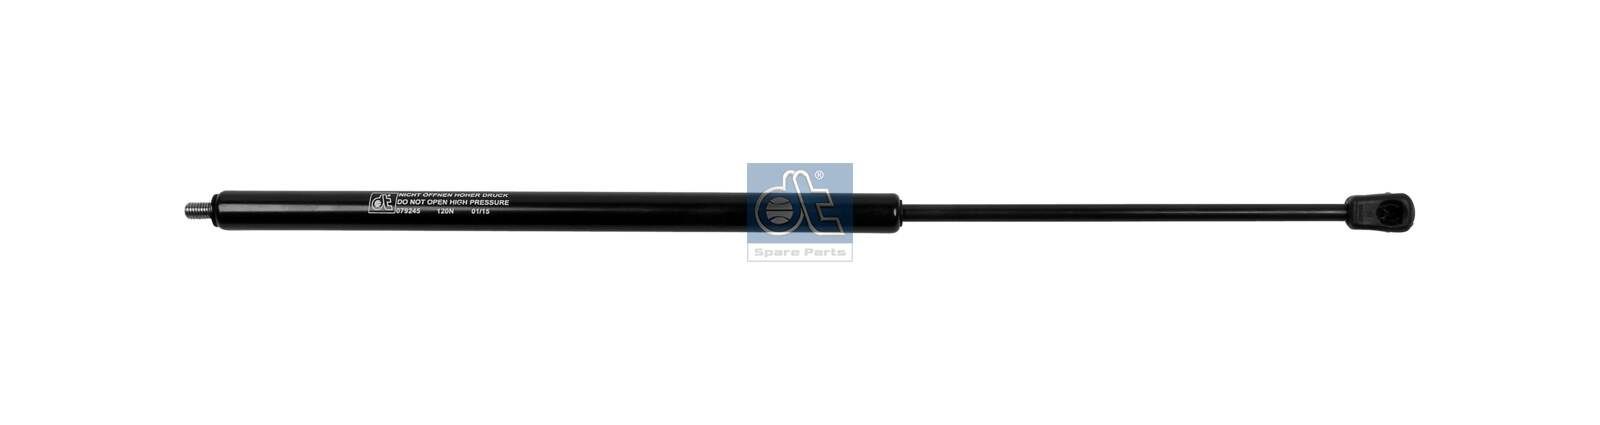 Mercedes T2 Gas spring boot 8265885 DT Spare Parts 4.68014 online buy